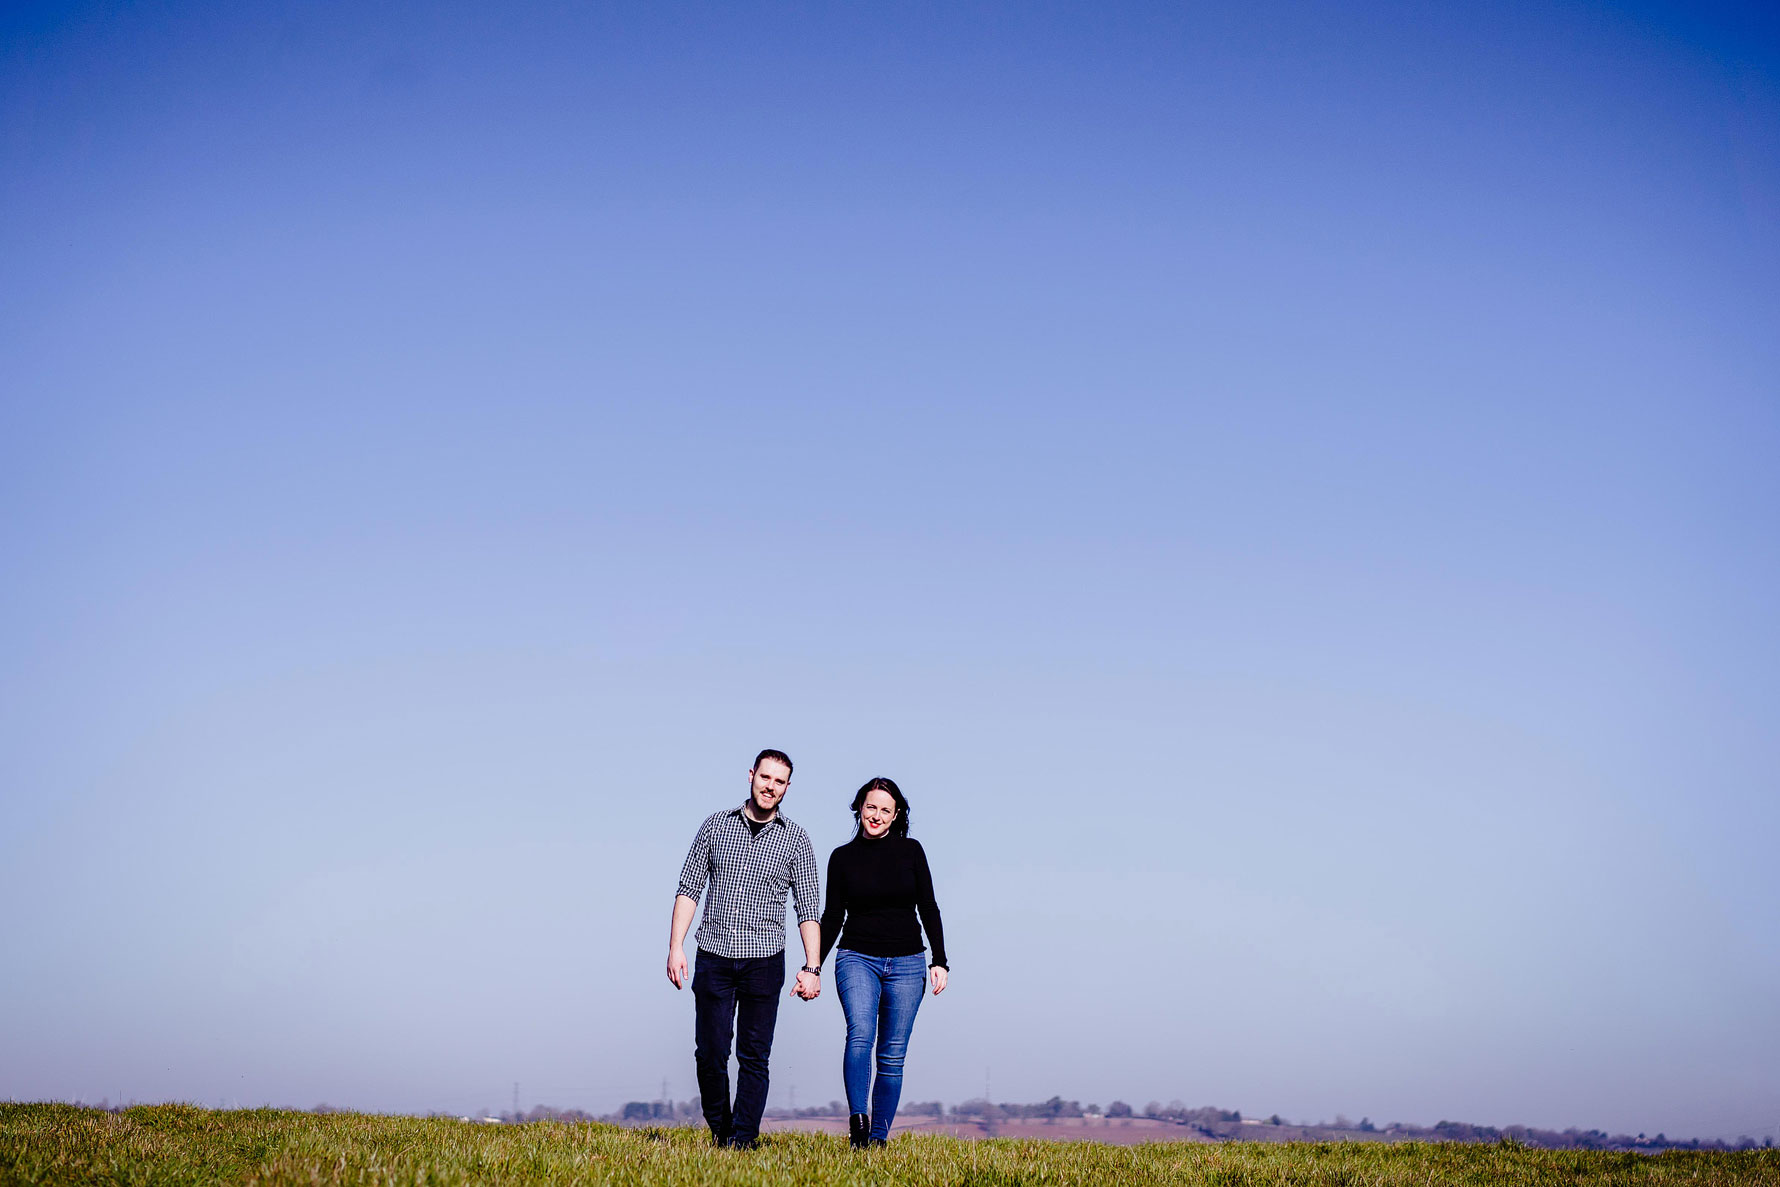 a images from an engagement shoot by Elliot w patching with a happy couple and a beautiful blue sky